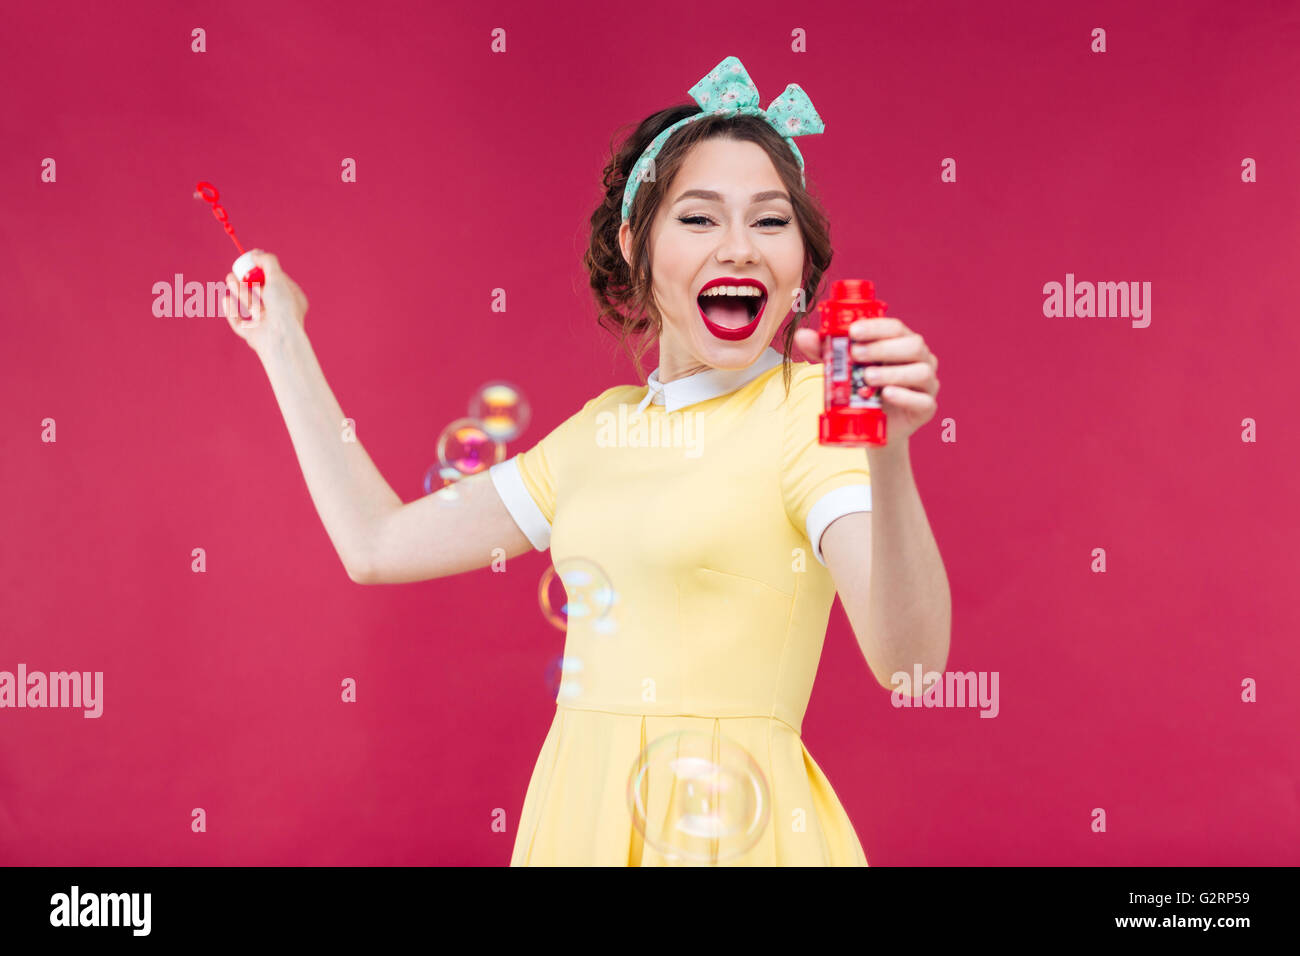 Happy excited pinup girl in yellow dress blowing soap bubbles and laughing over pink background Stock Photo